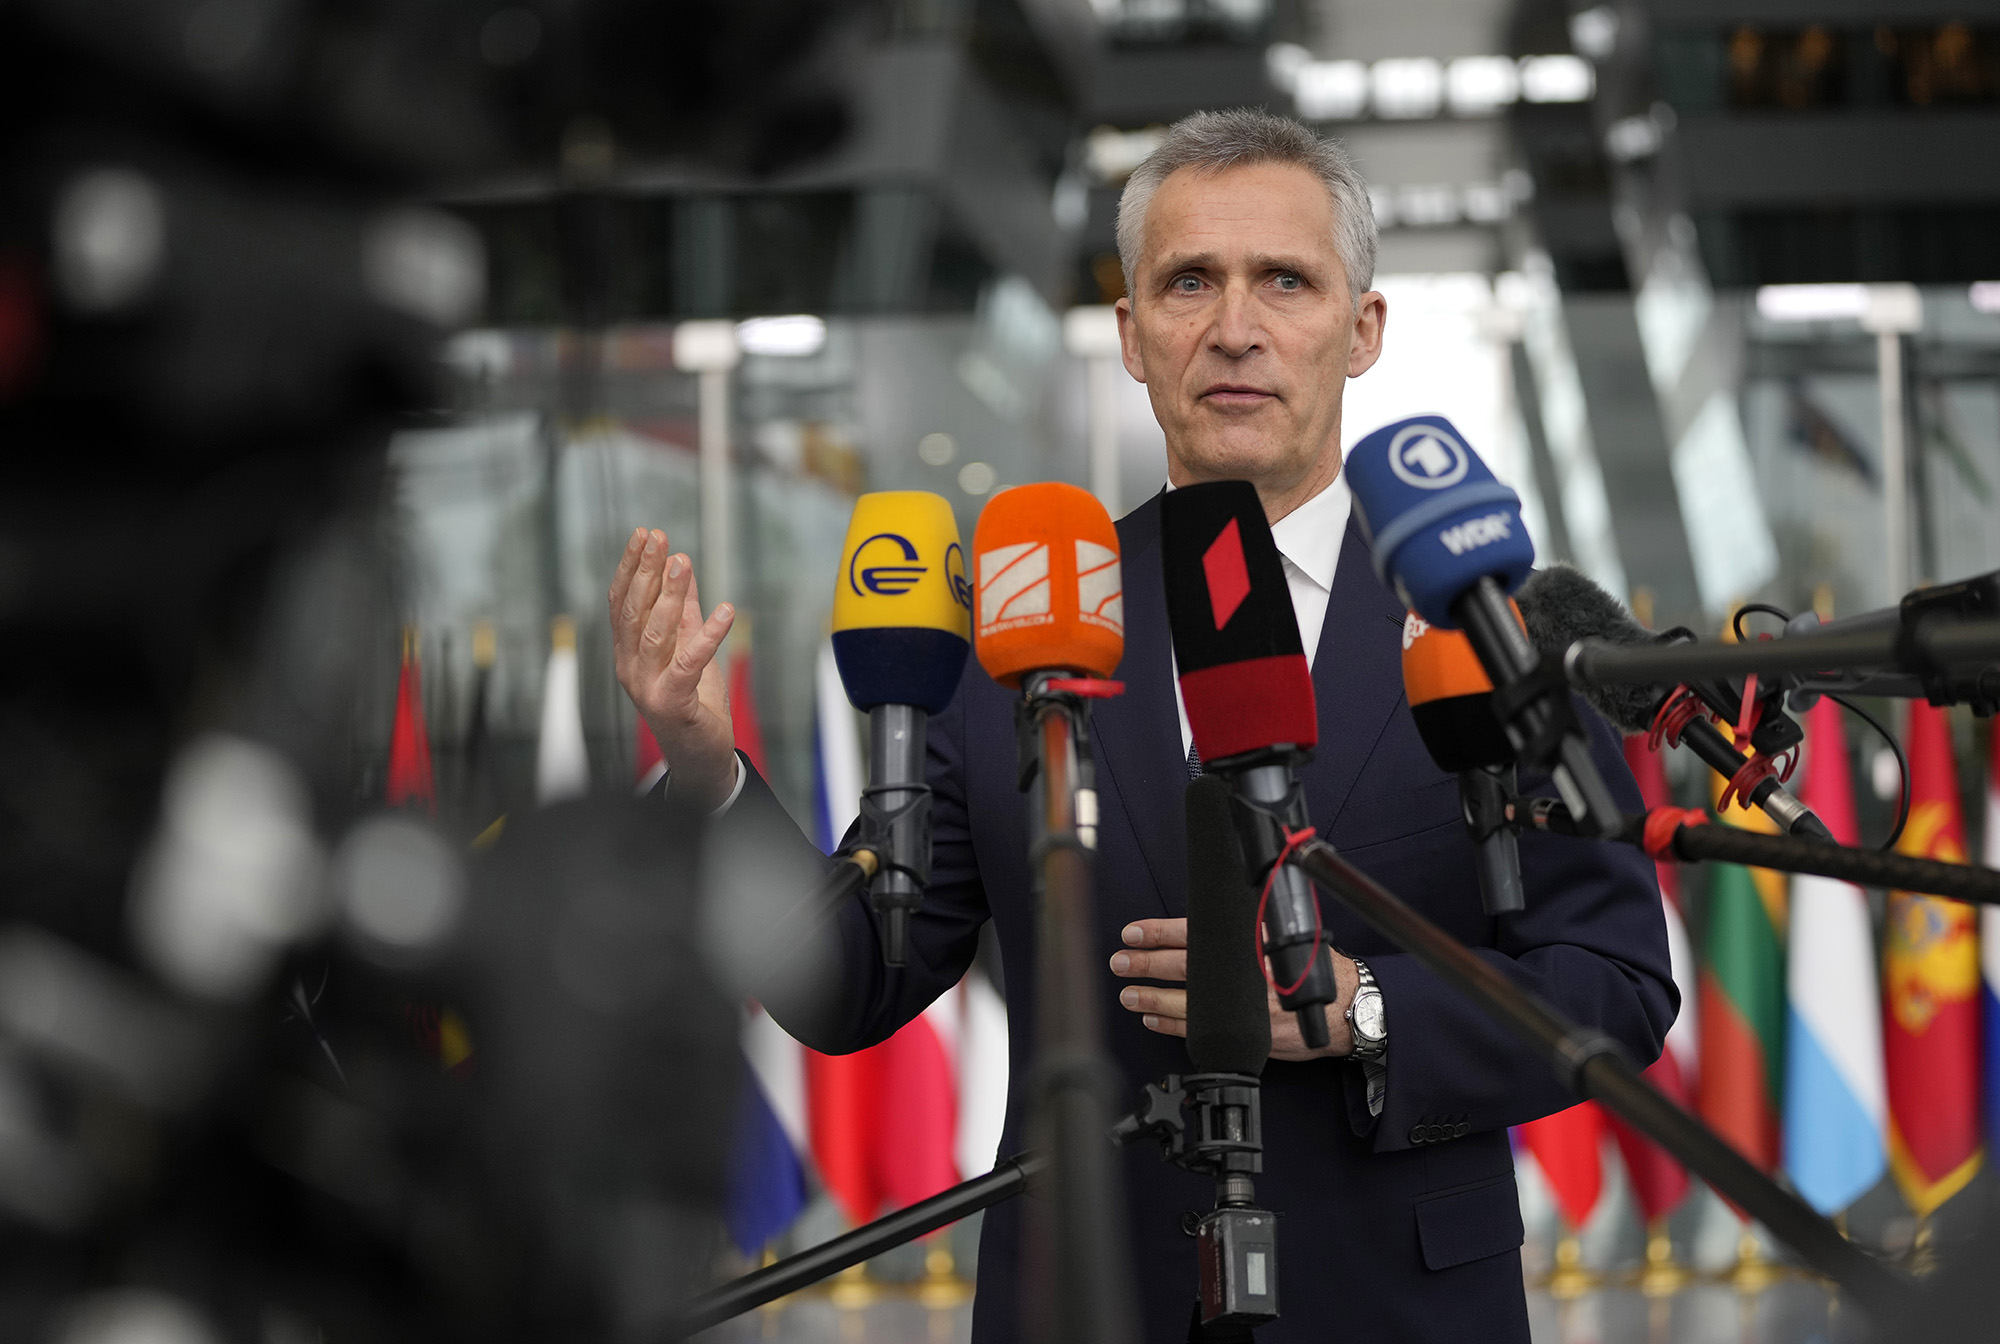 NATO Secretary General Jens Stoltenberg speaks as he arrives for a meeting of NATO foreign ministers at NATO headquarters in Brussels, Belgium, on April 6.